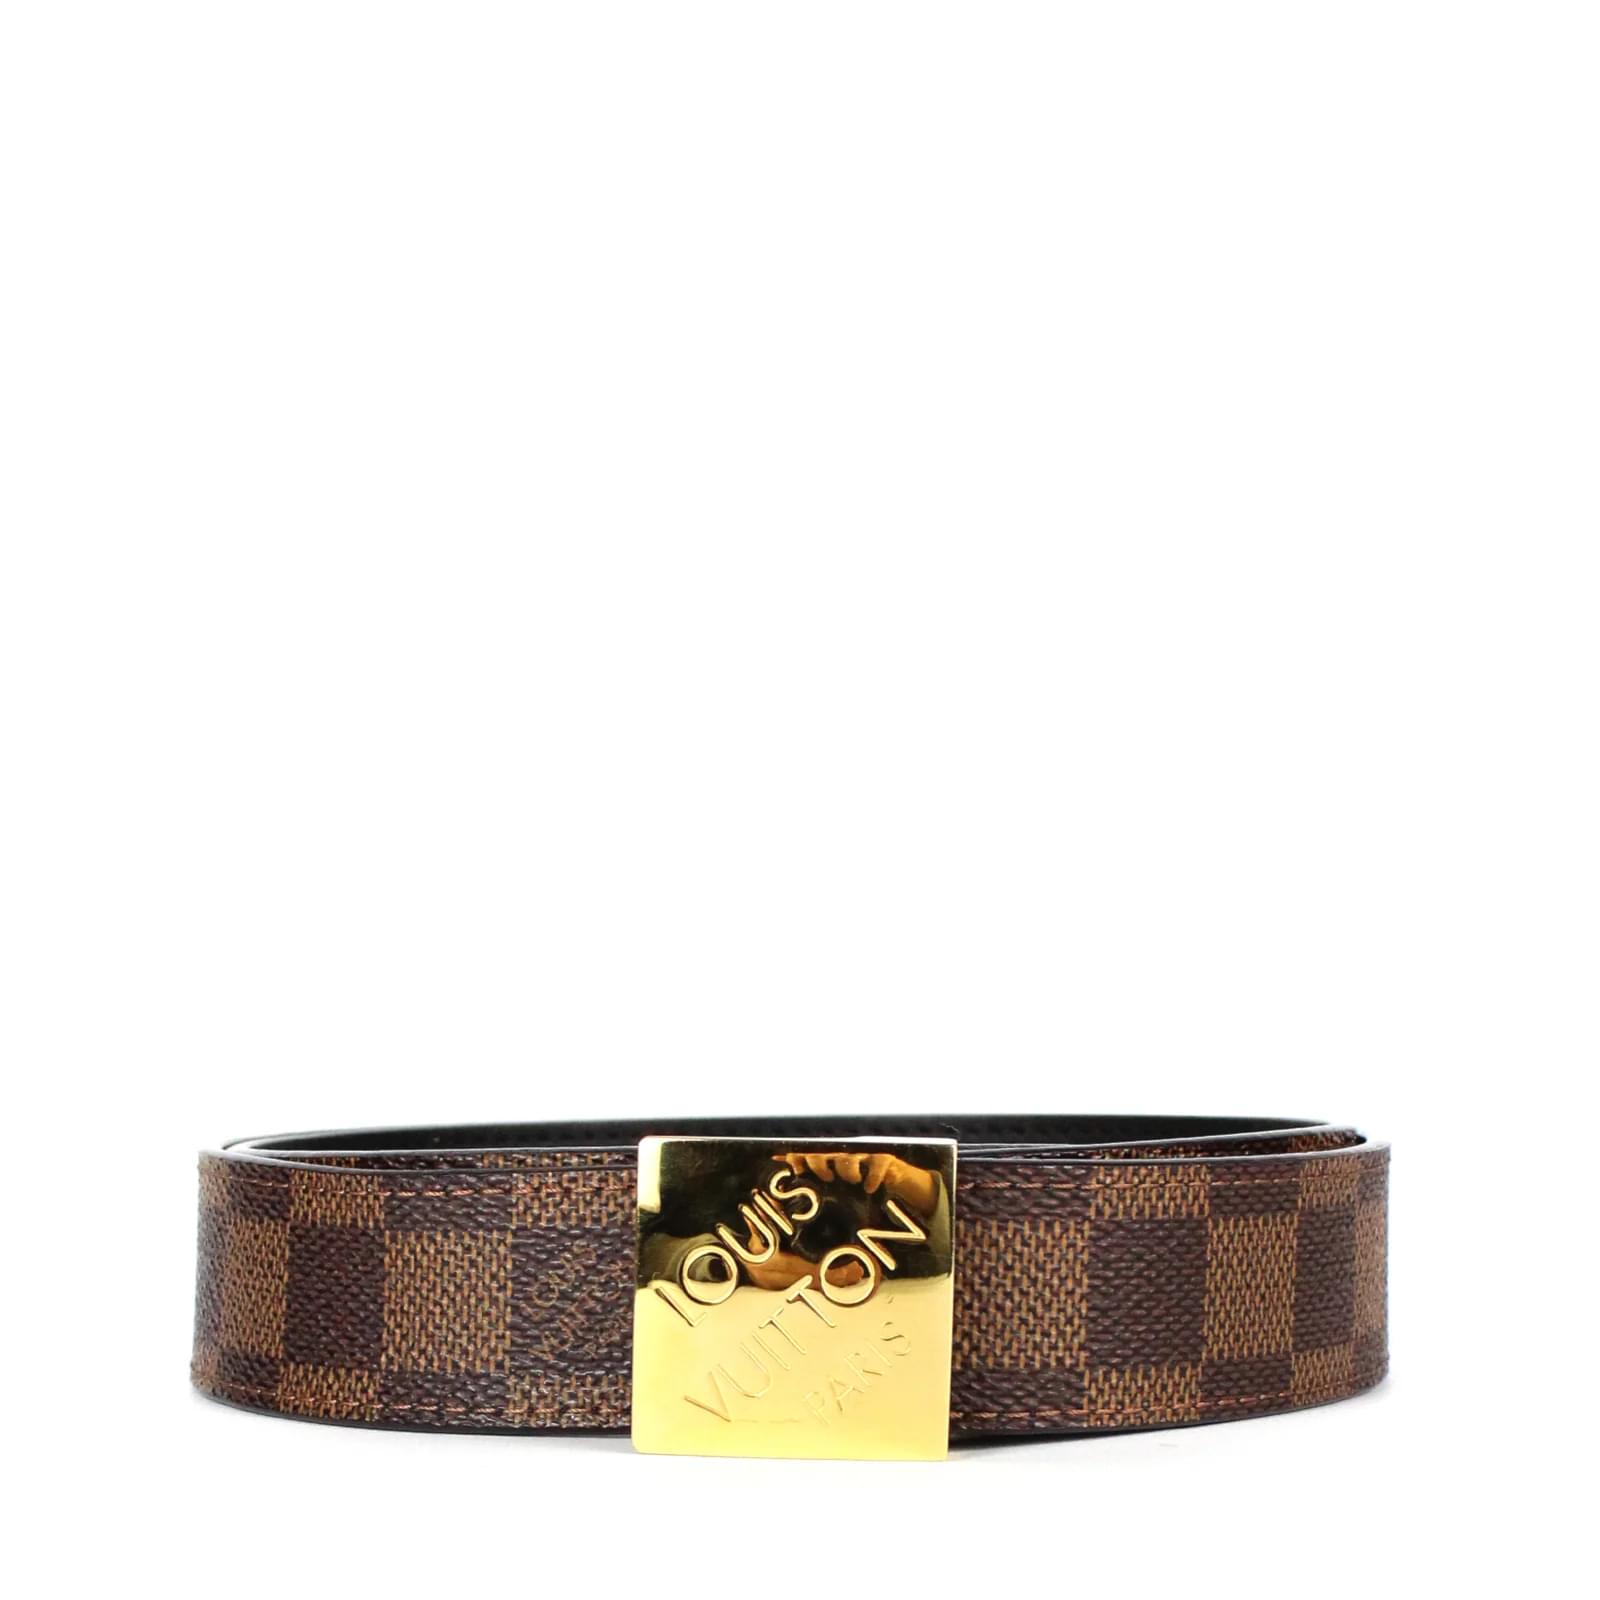 Are Louis Vuitton Belts Leather